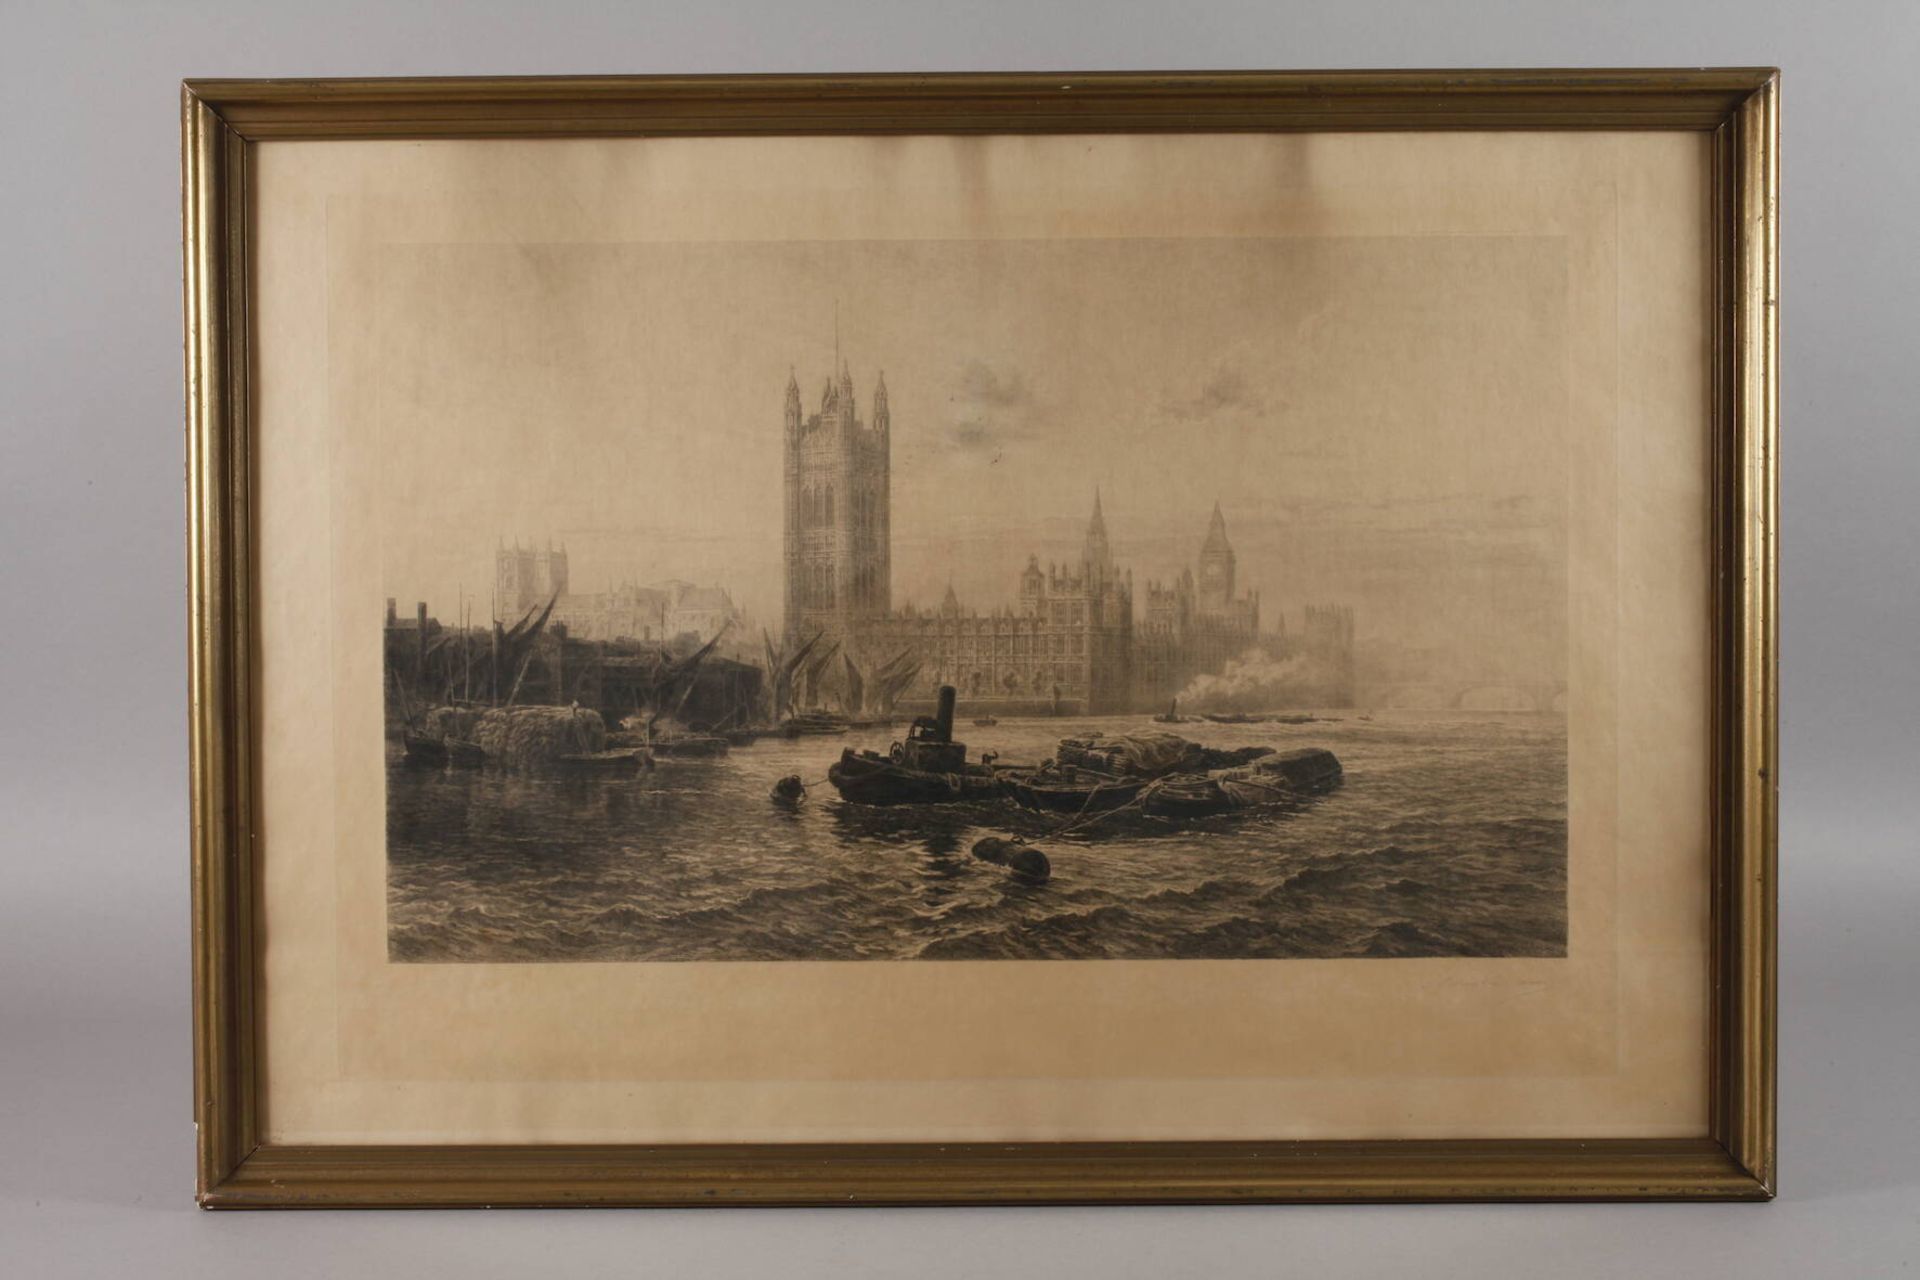 Alfred L. Brunet-Debaines, Blick auf WestminsterBlick über die Themse auf Palace of Westminster - Image 2 of 3